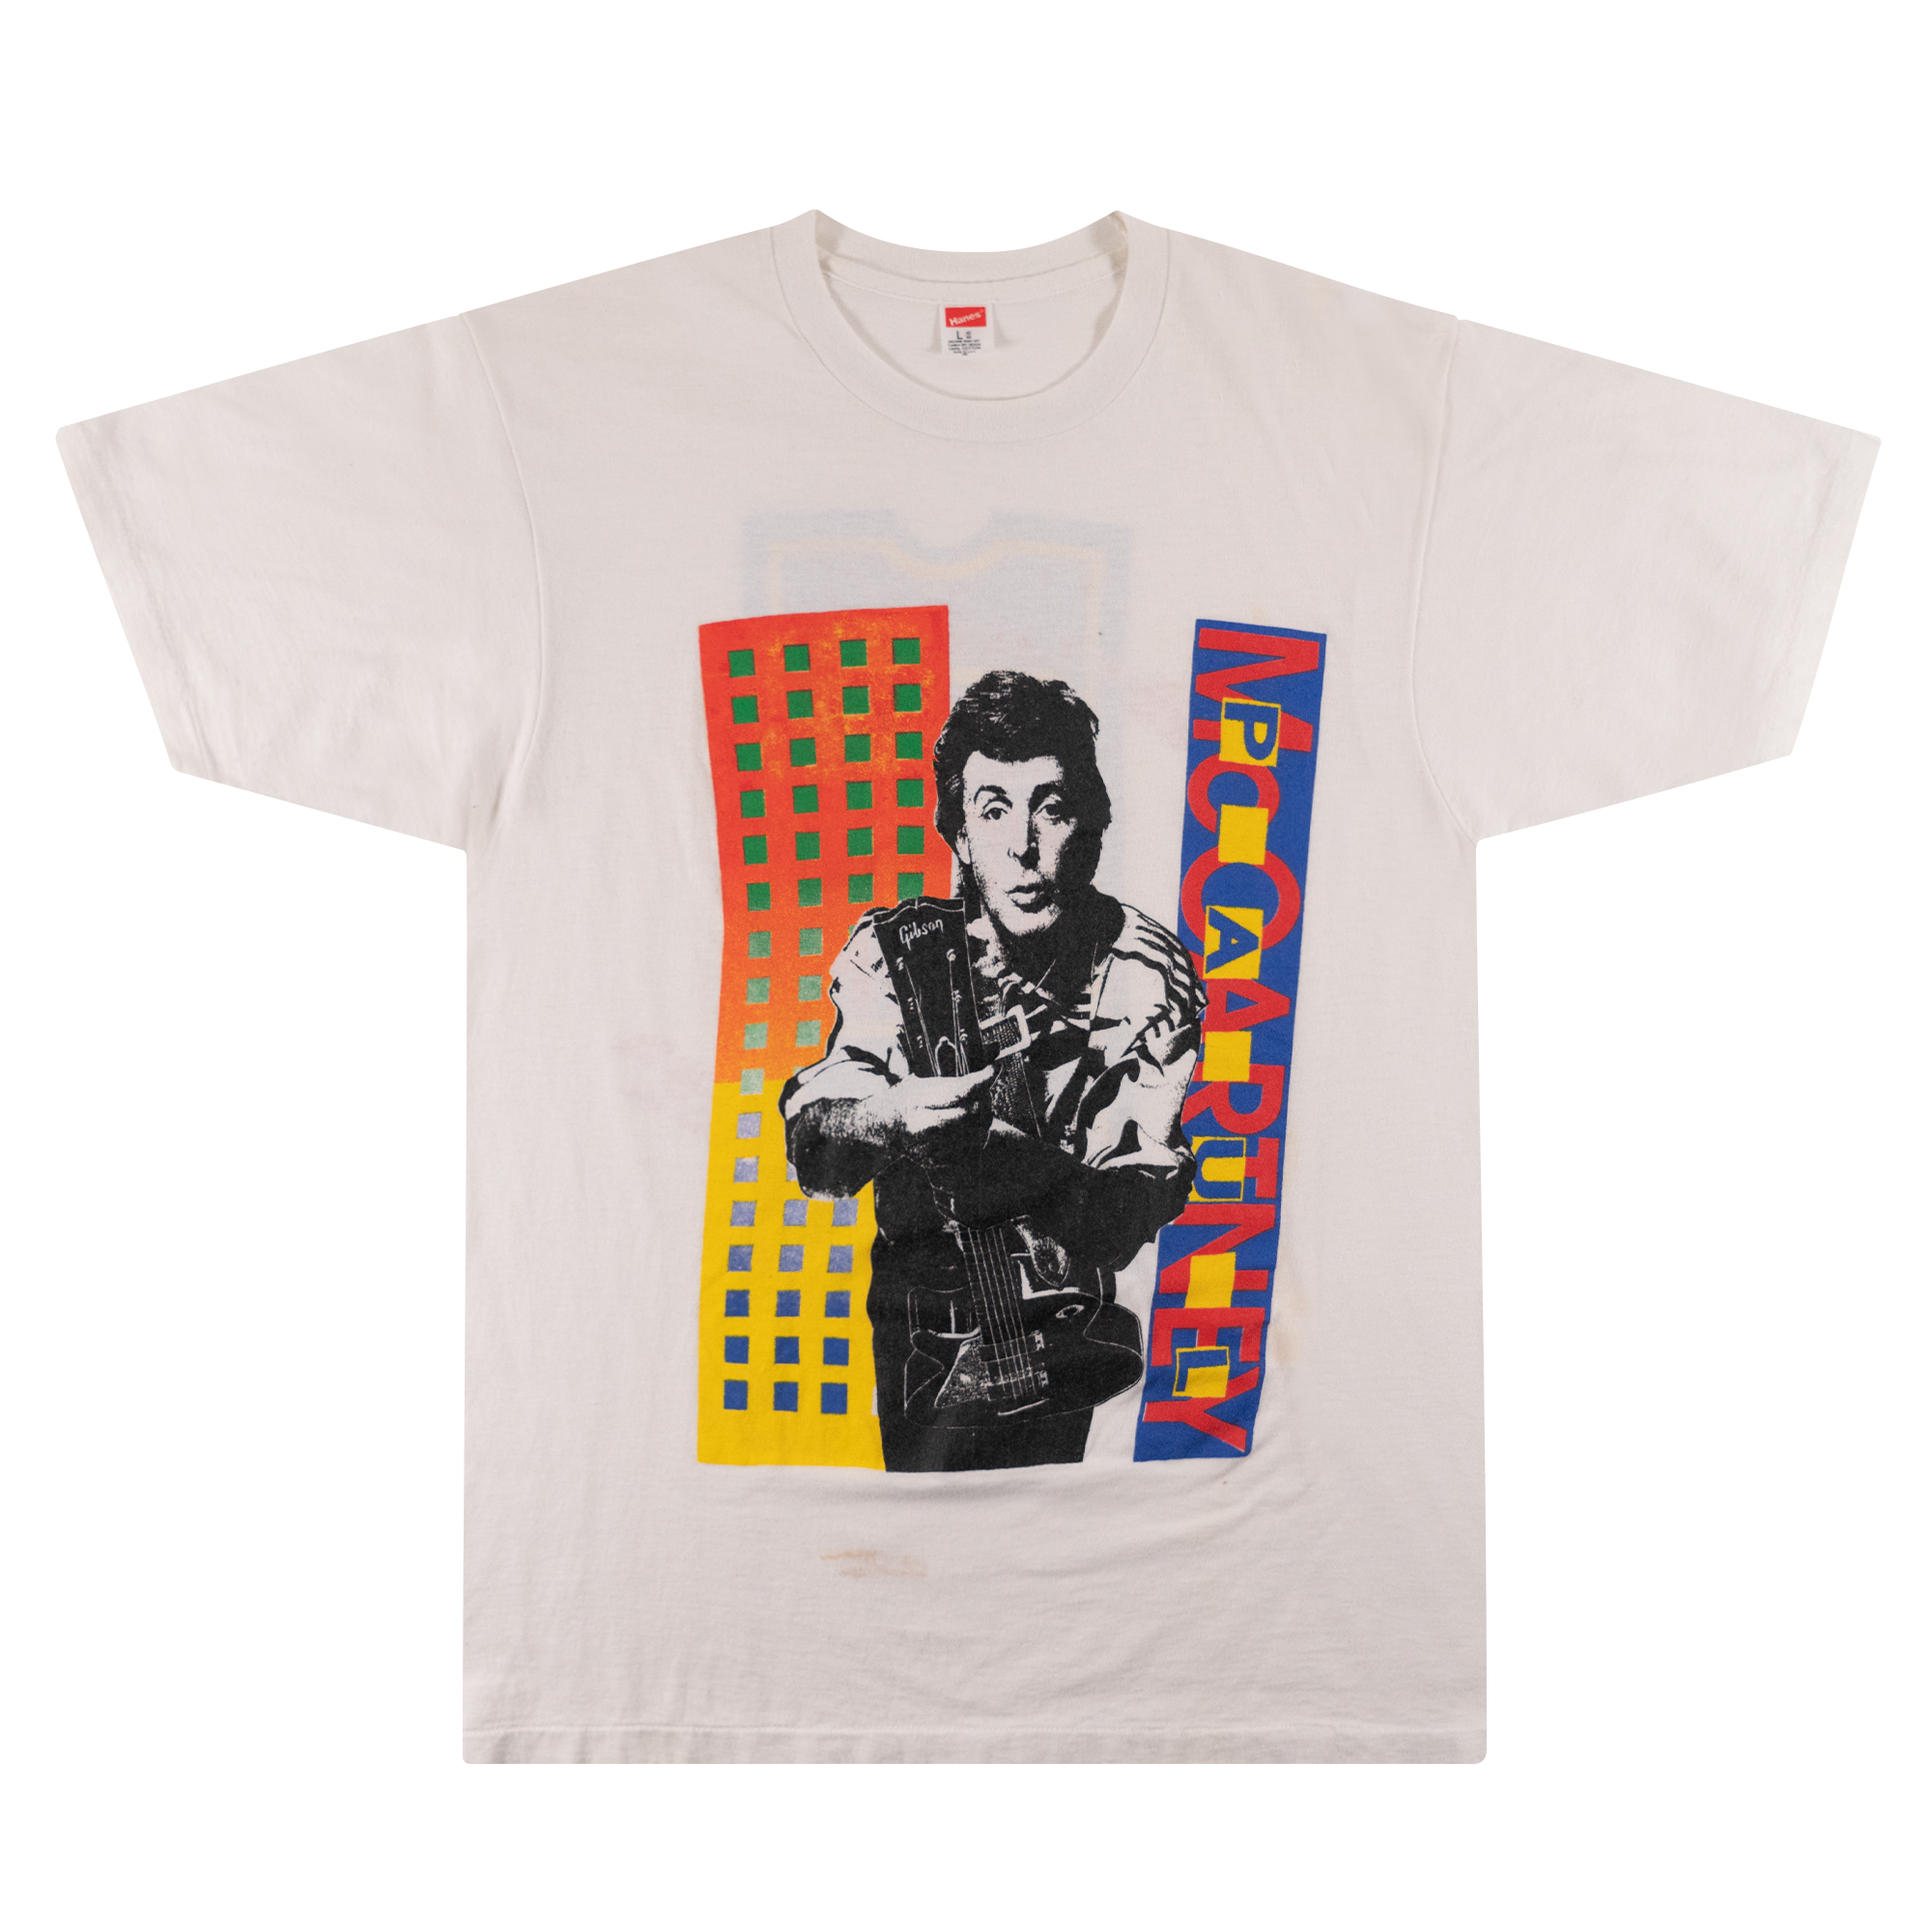 Paul McCartney "Friends Of The Earth" Live Tour 1990 Tee White-PLUS